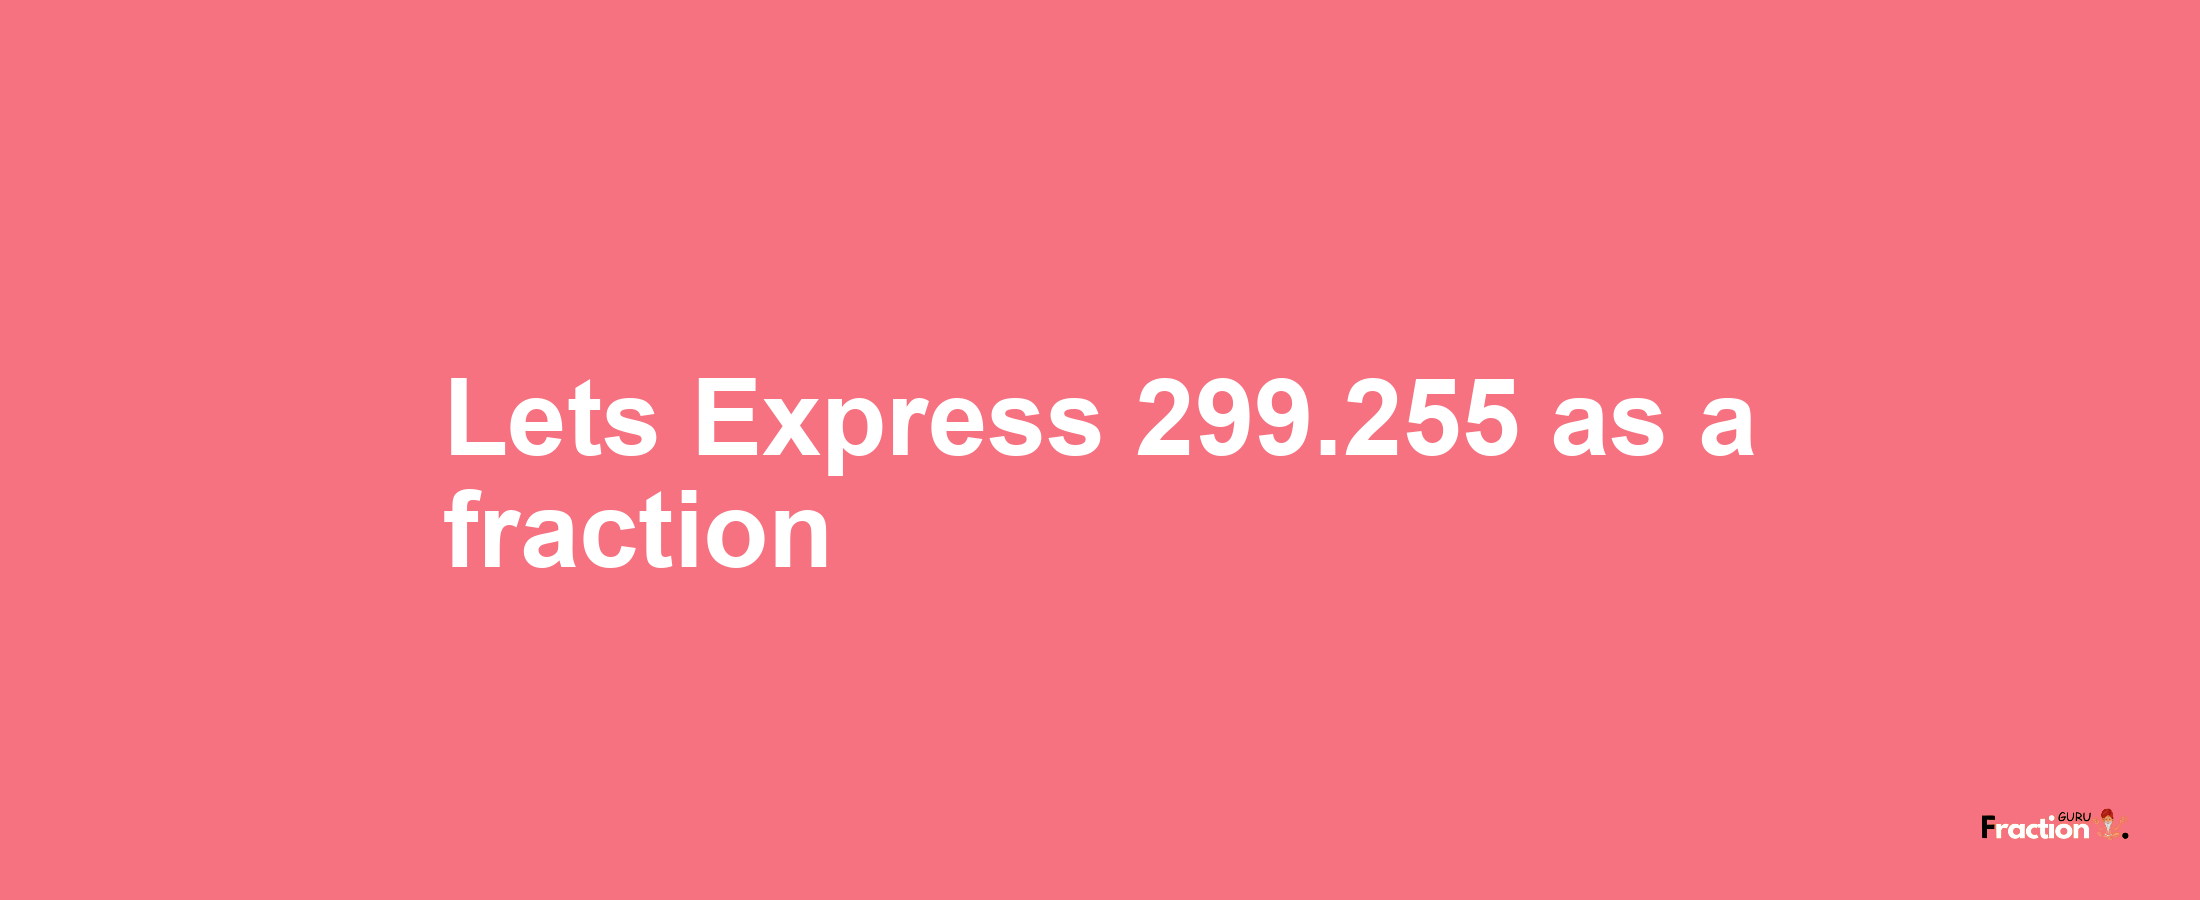 Lets Express 299.255 as afraction